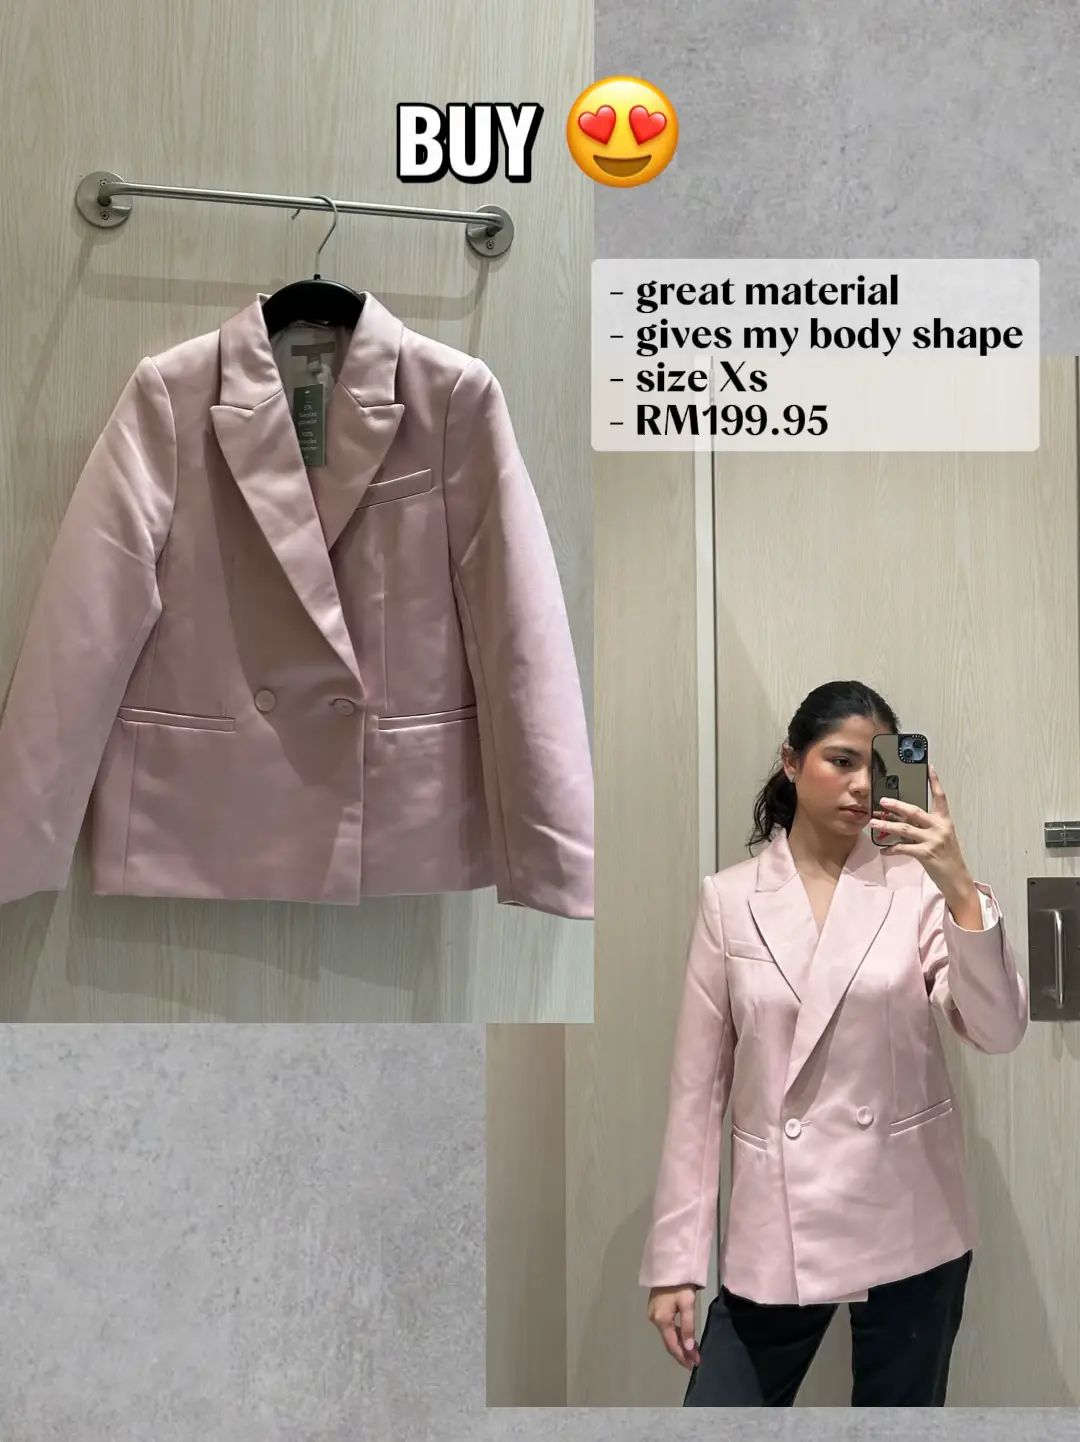 FORMAL BLAZER TRY ONS FROM H&M, PETITE FRIENDLY